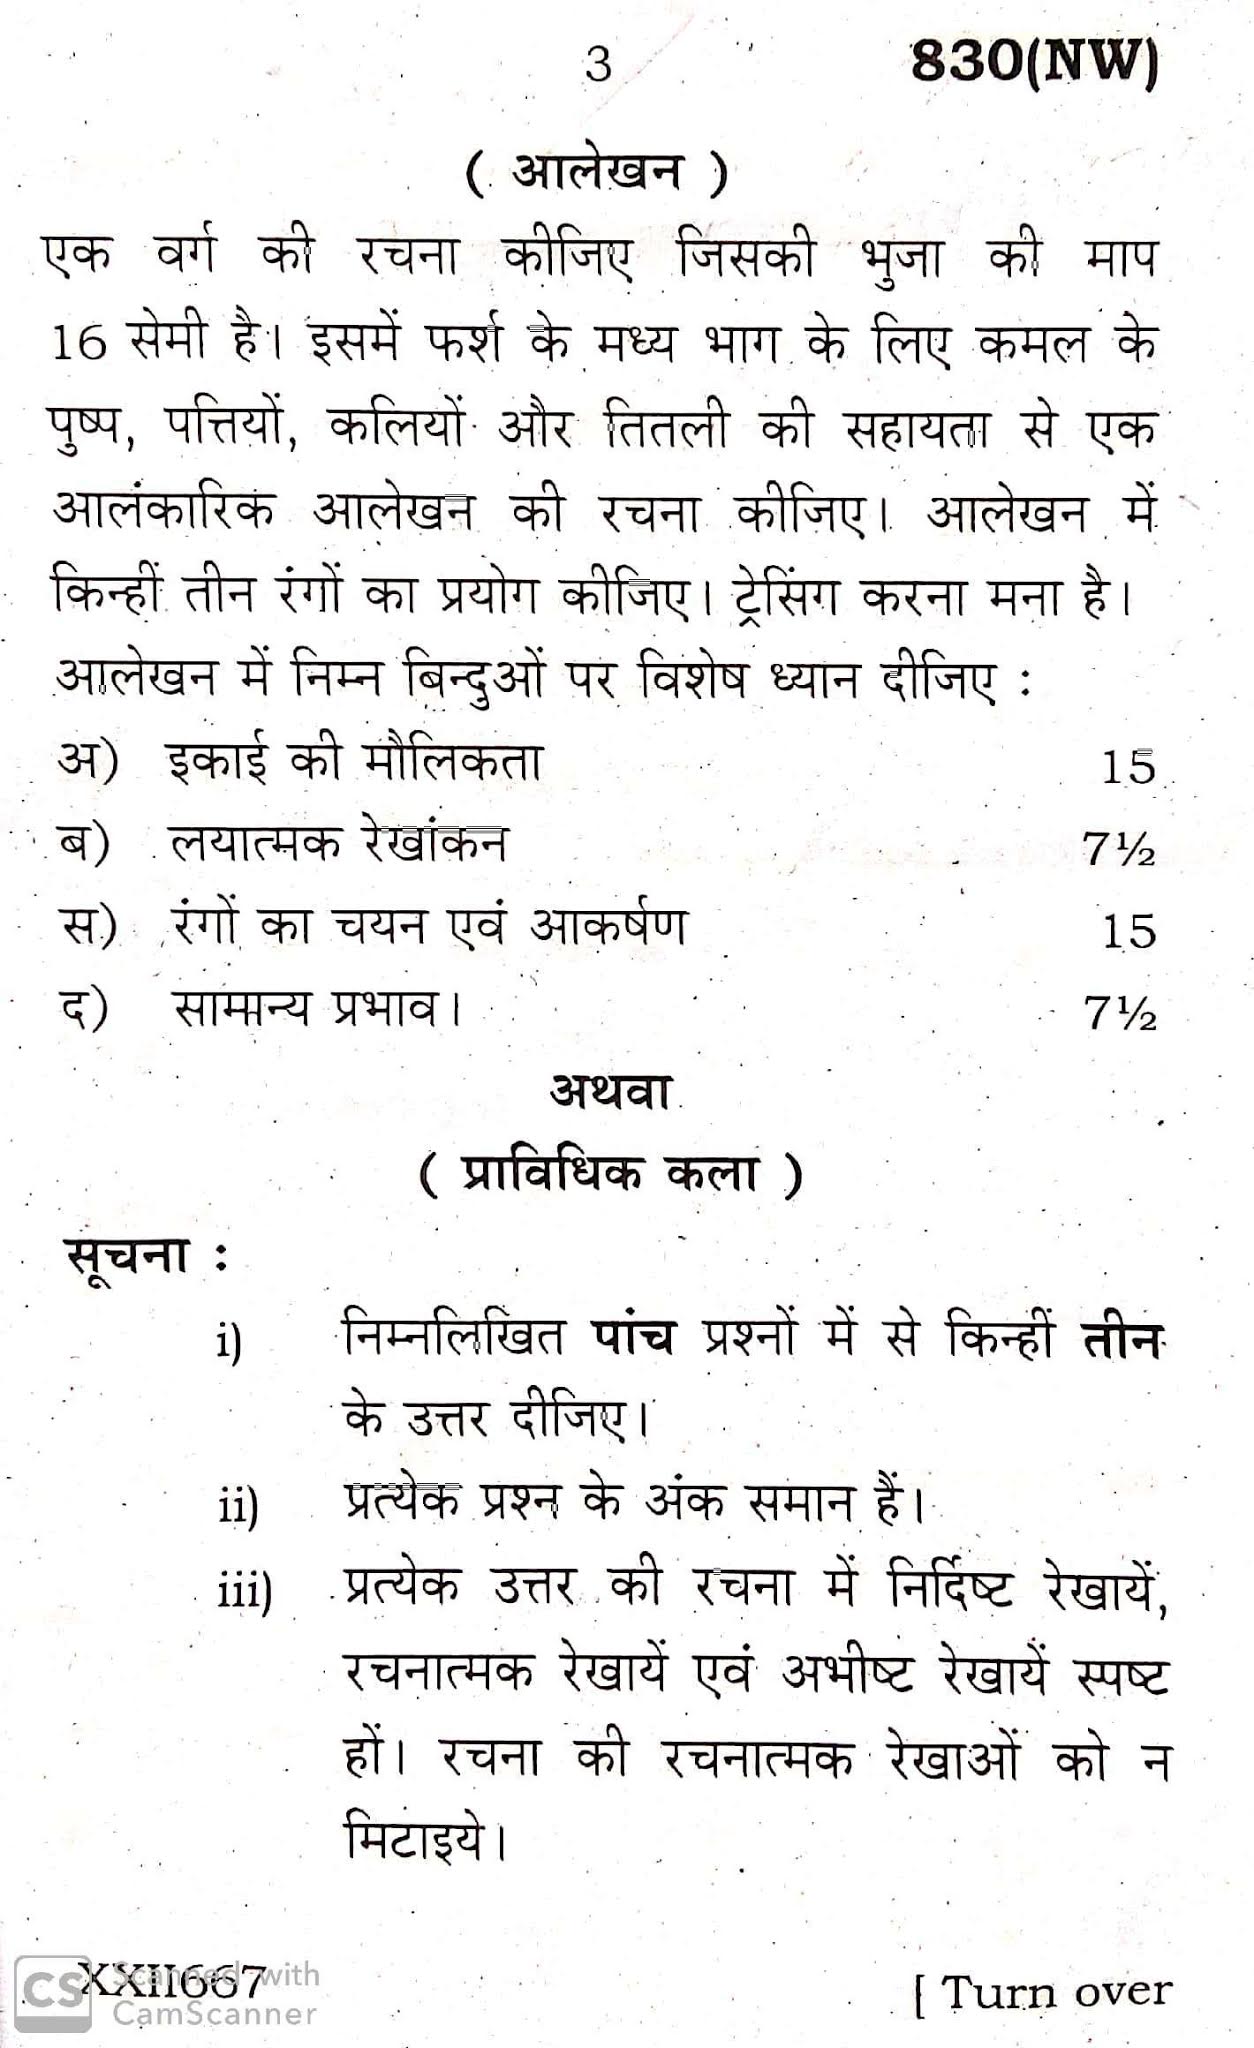 Drawing, UP Board Question paper for 10th (High school), 2020 Examination